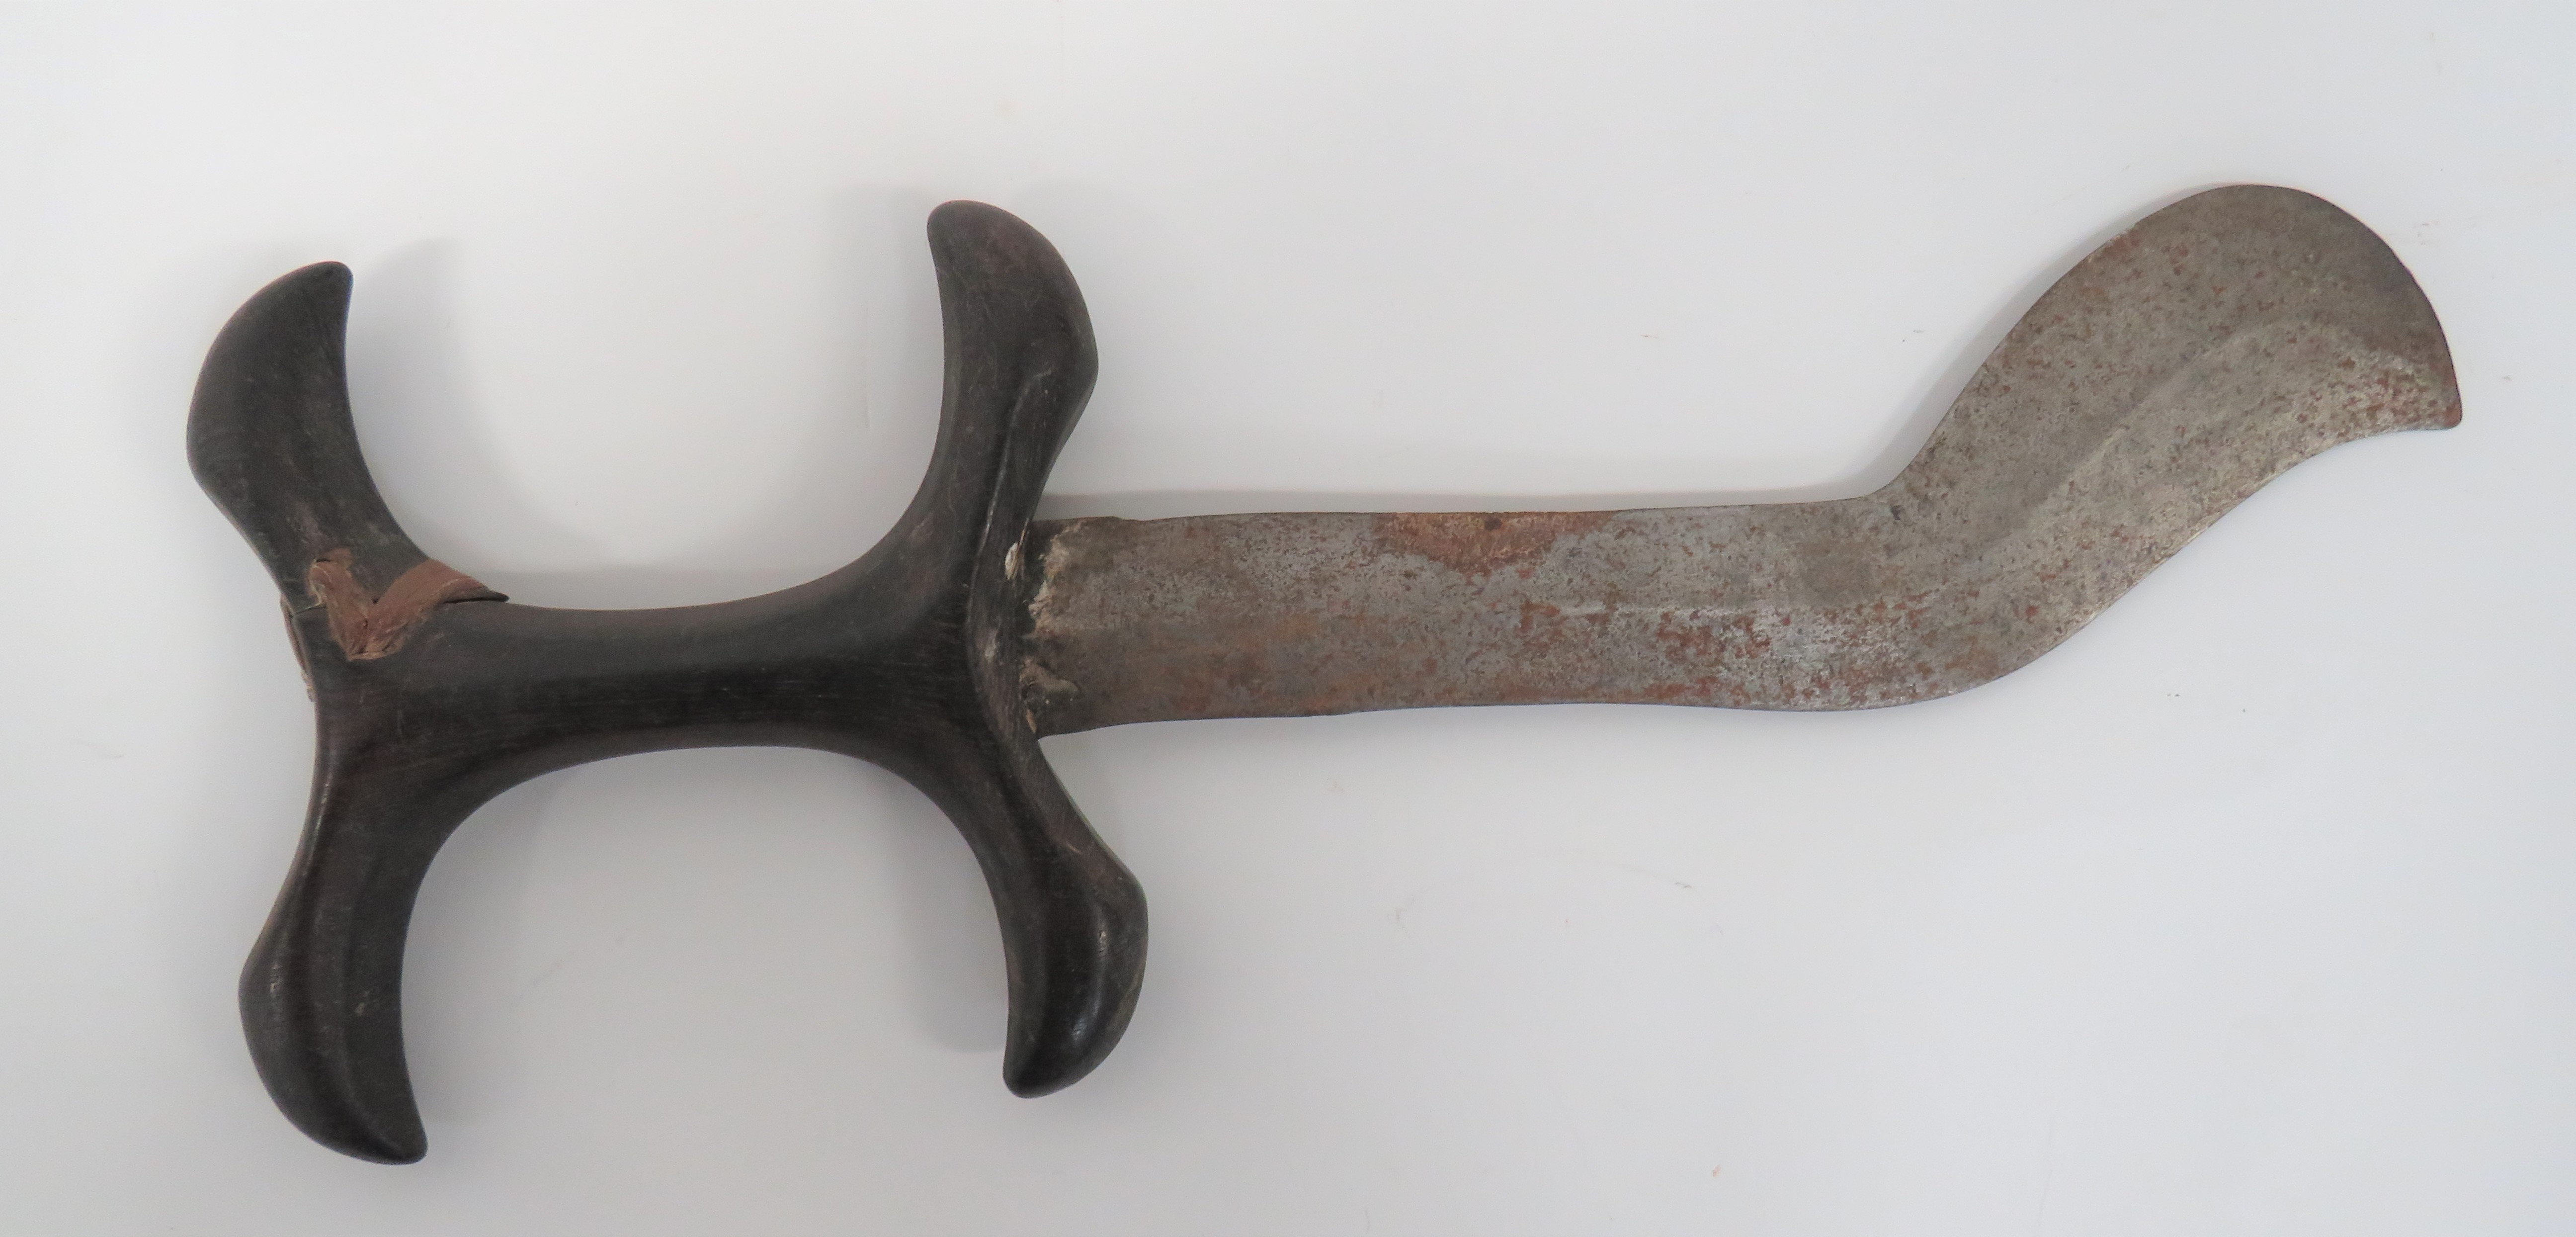 19th Century Hadendoa Dagger From Eritrea  9 1/2 inch, double edged, straight blade with lower - Image 2 of 2